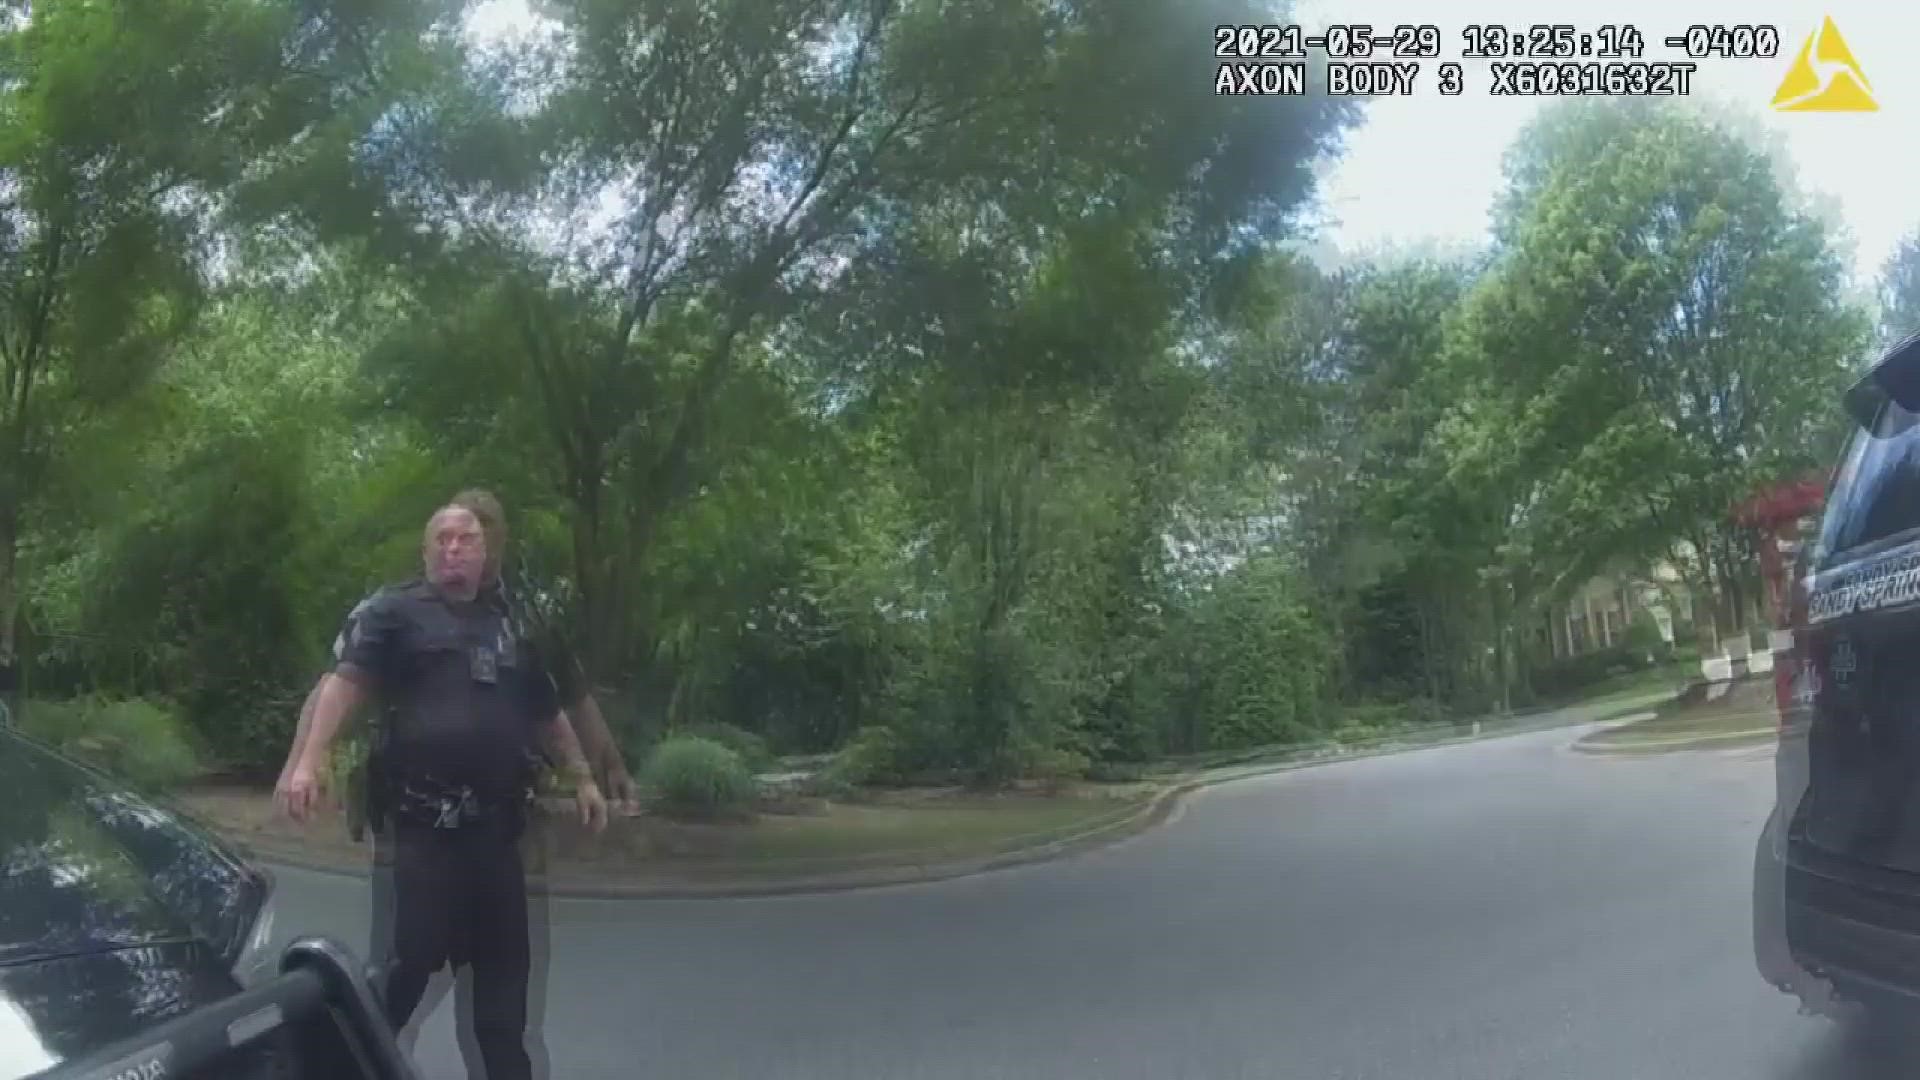 Officer body camera video shows investigators discussing the alleged domestic violence incident.